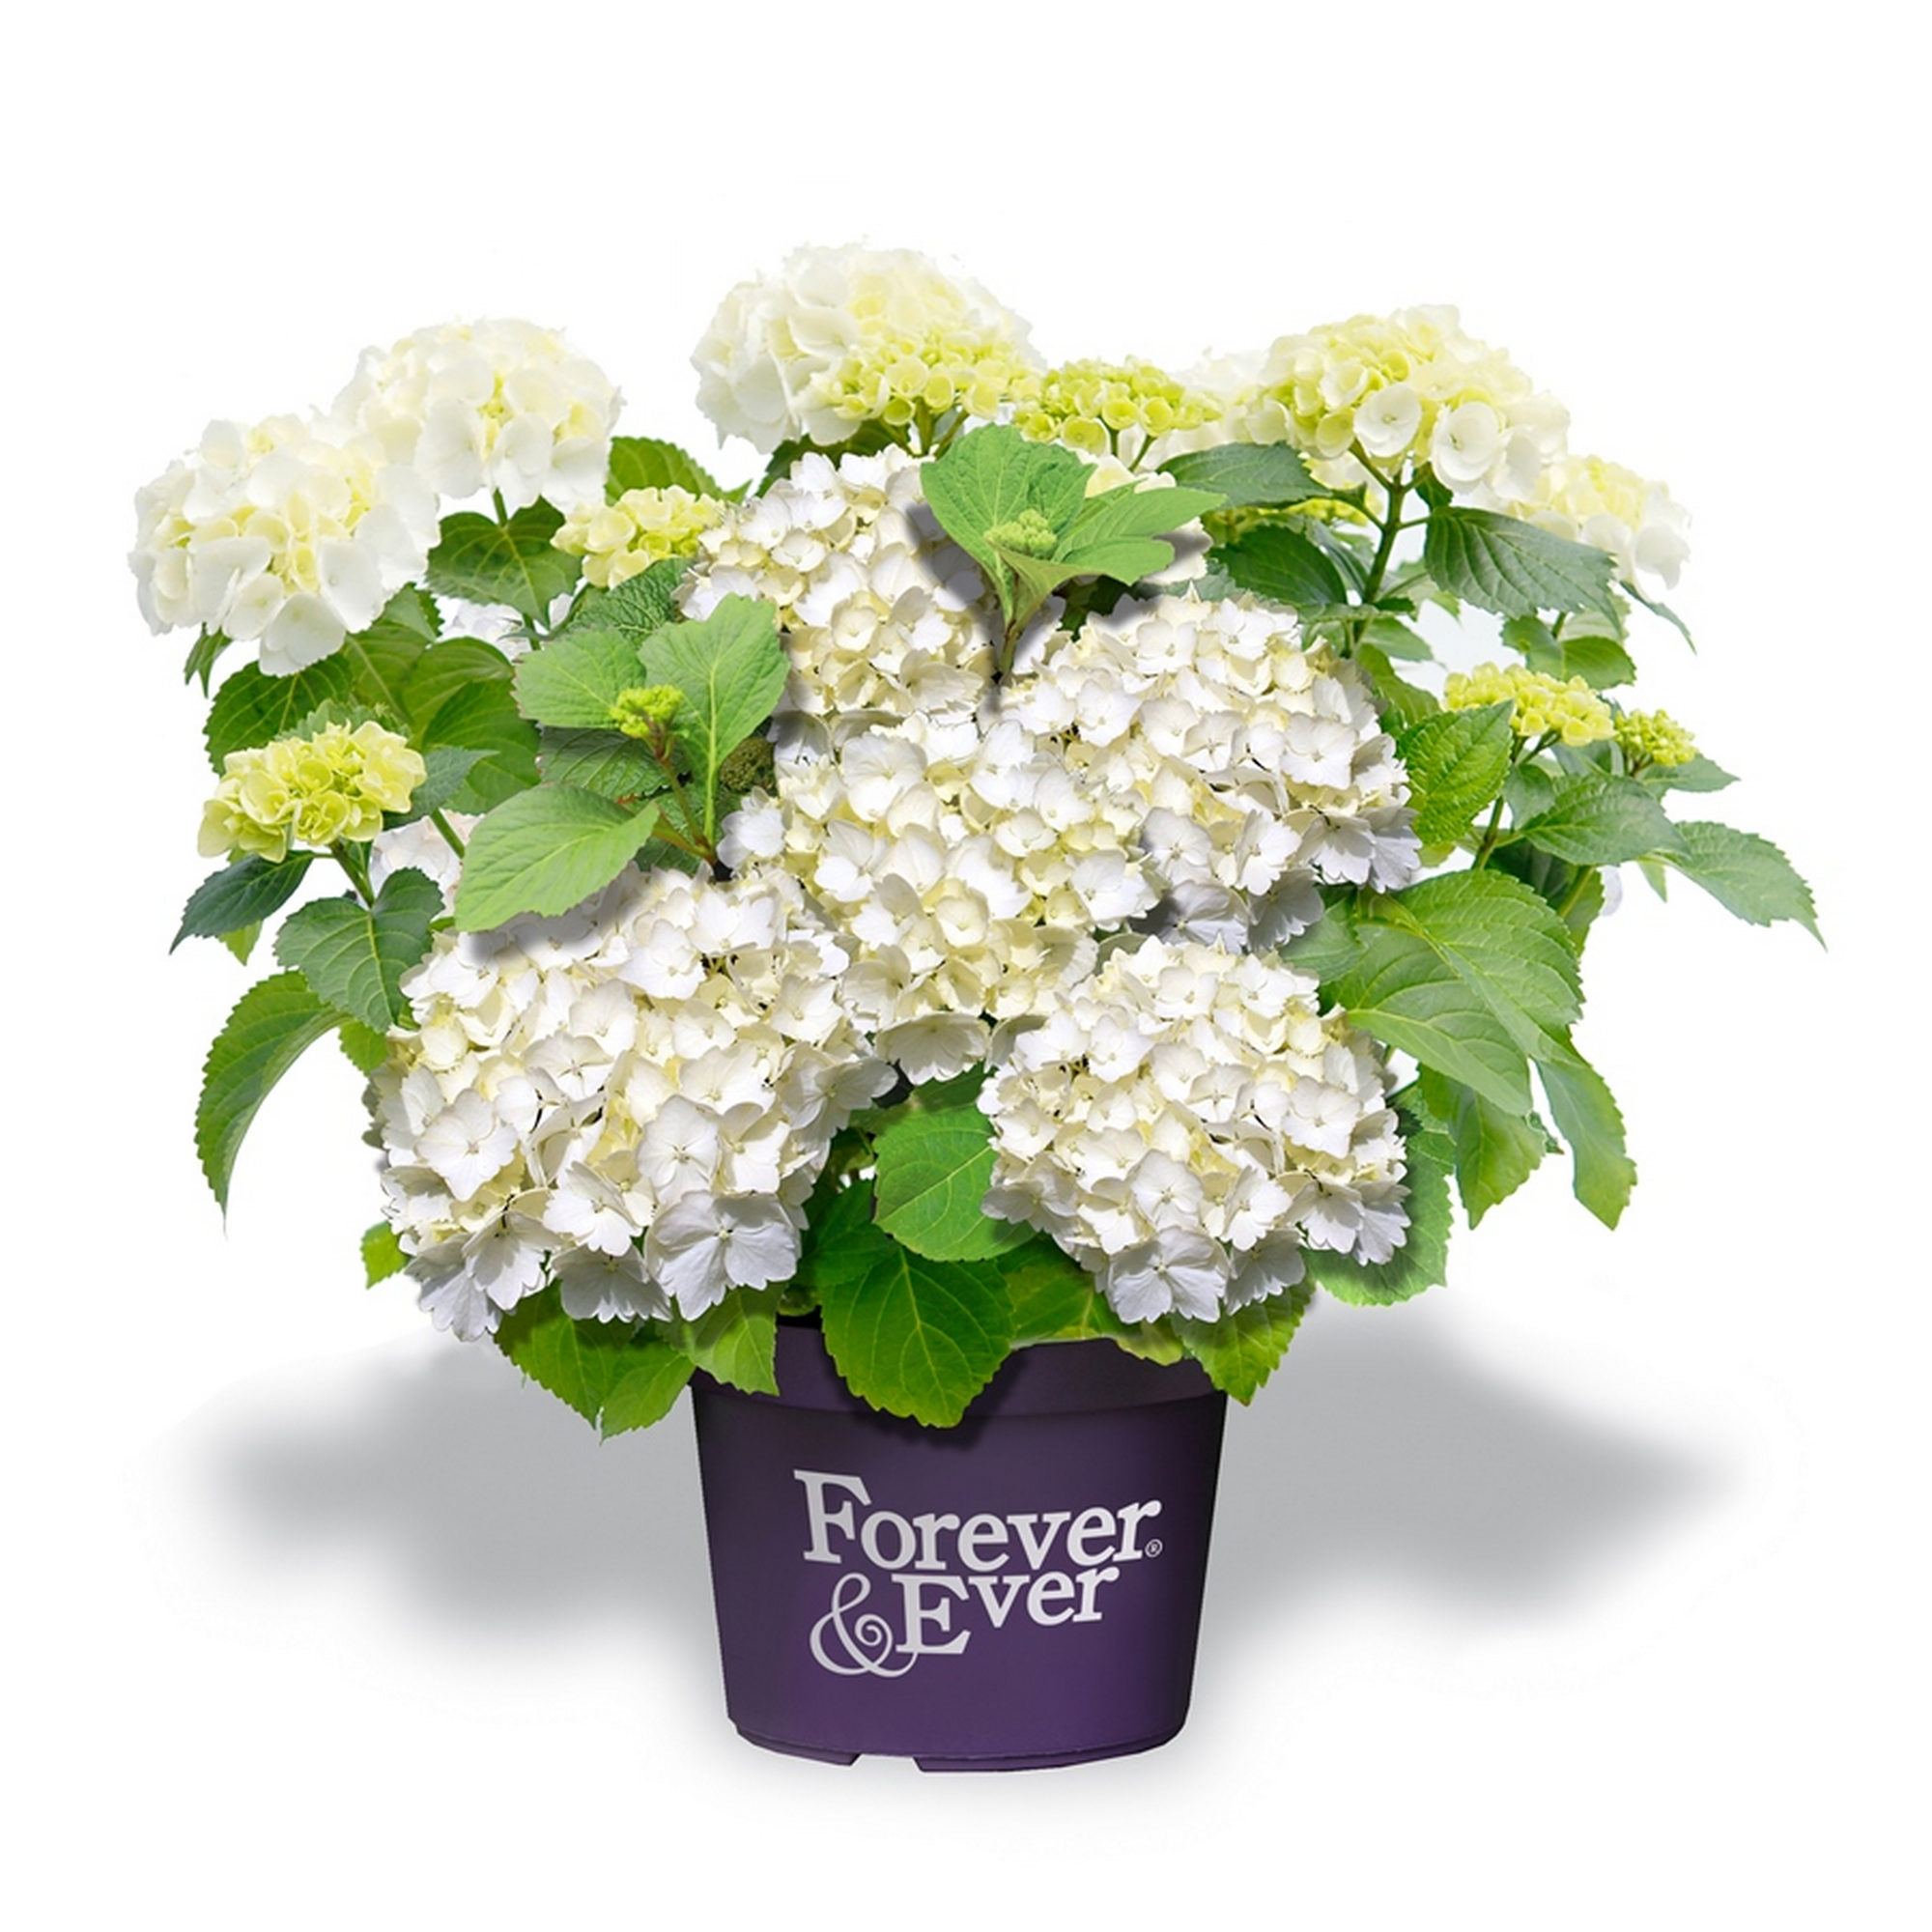 Hortensie 'Forever & Ever®' weiß, Topf Ø 23 cm + product picture